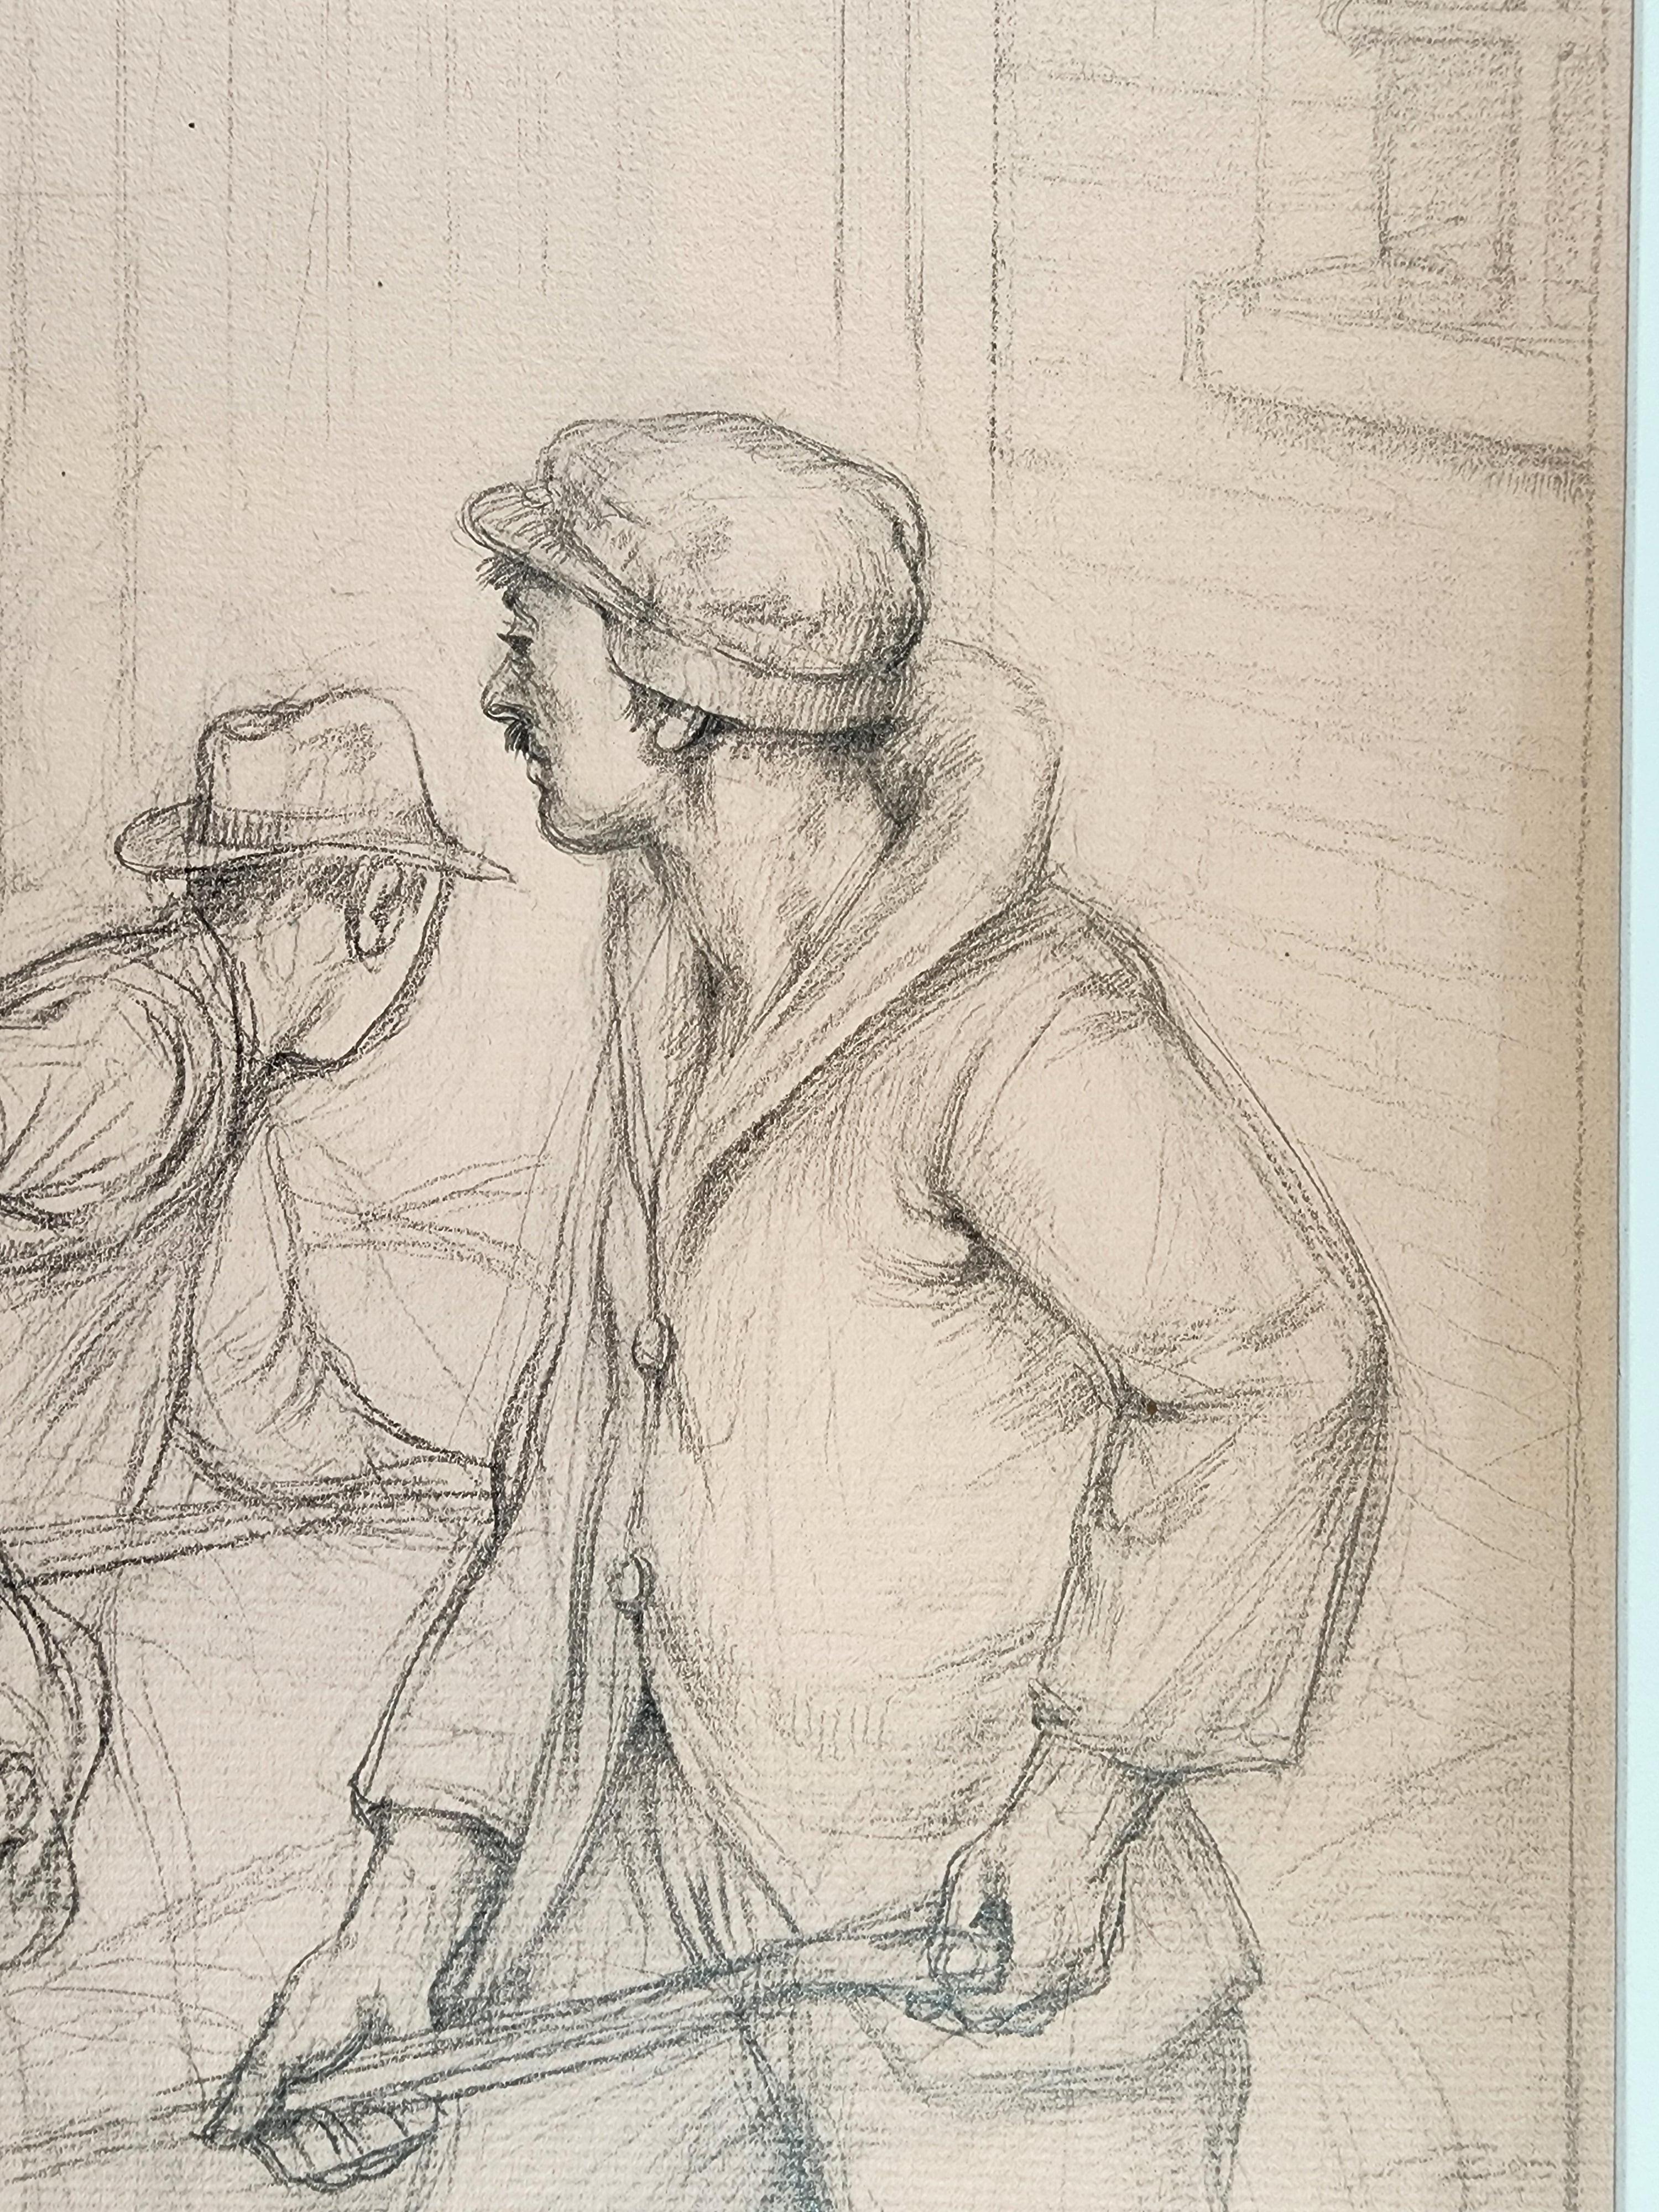 RGRFinearts is pleased to offer this WPA Era drawing by Carl Pickhardt of construction workers.
It is matted and drawn on slightly pinkish paper.
A wonderful addition to a WPA or labor collection.